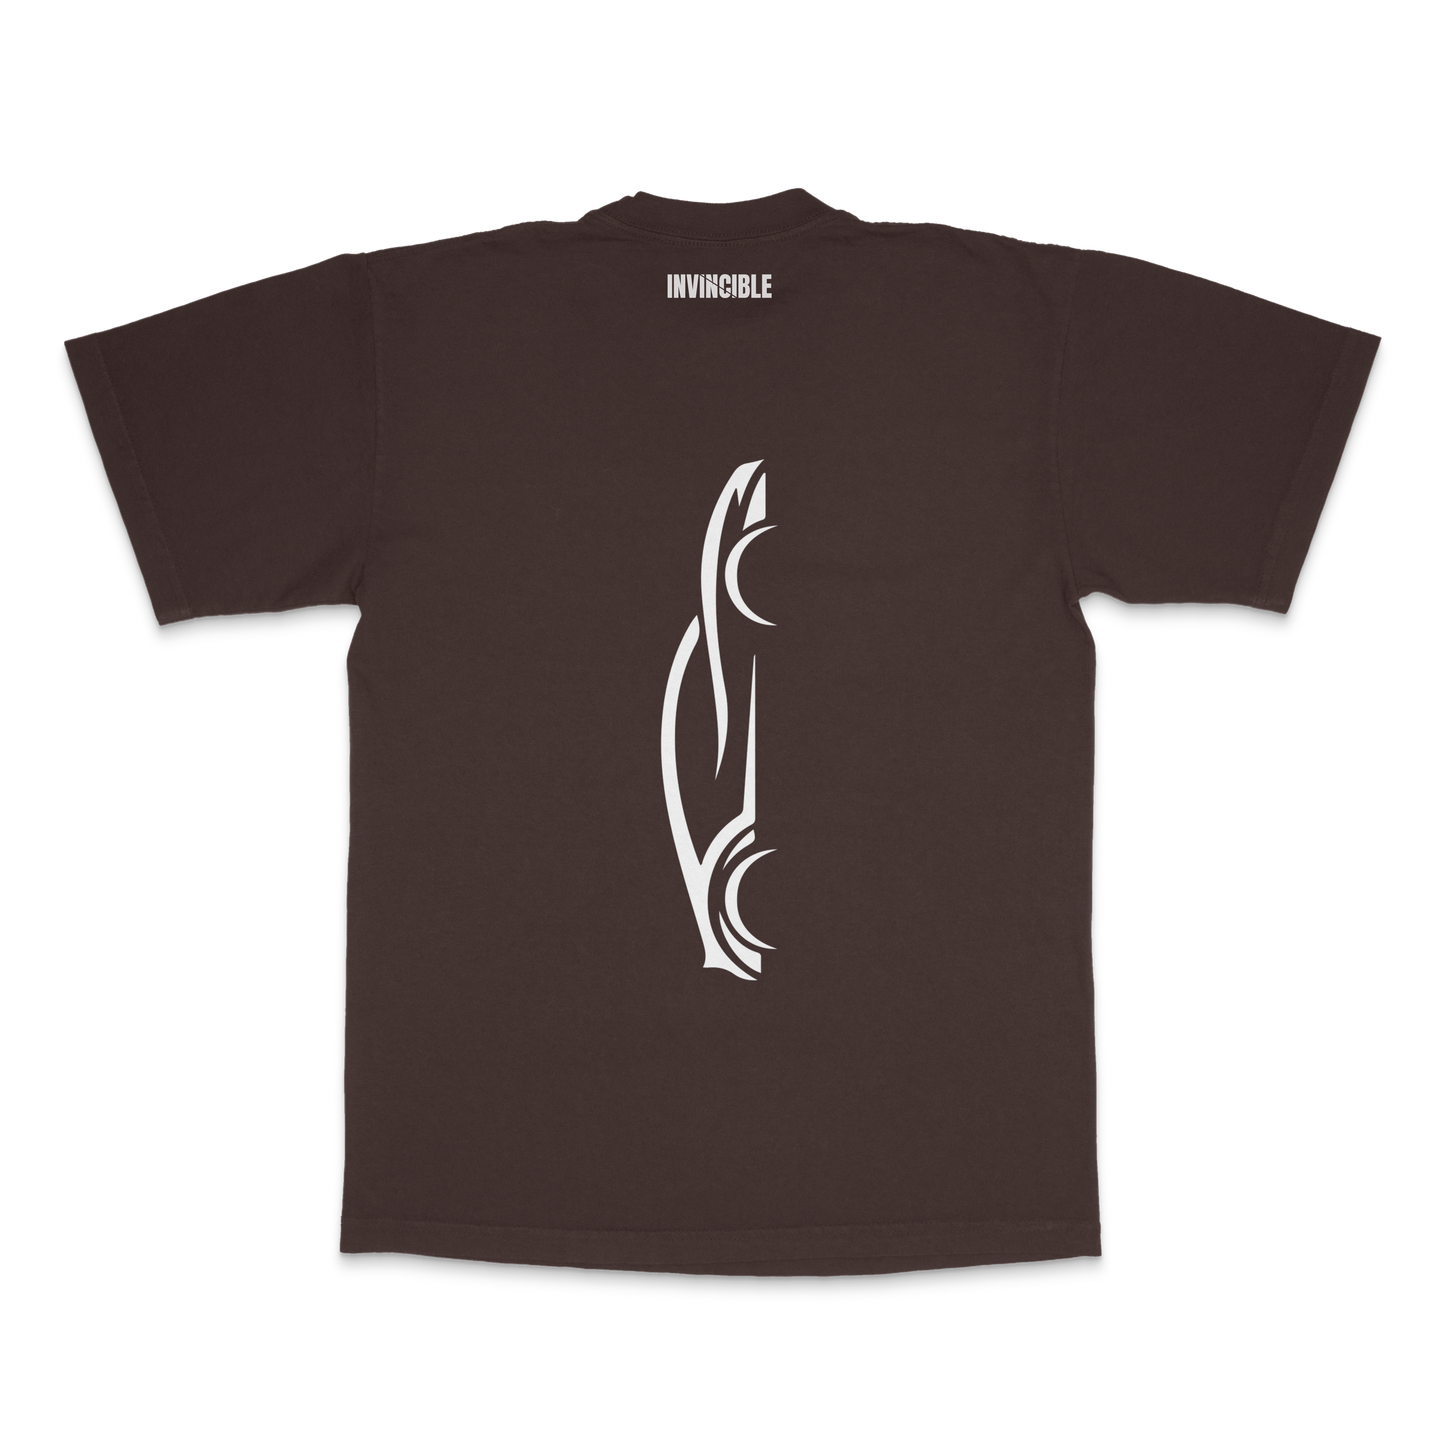 Turbocharged Tee - Invincible Exclusives - Streetwear